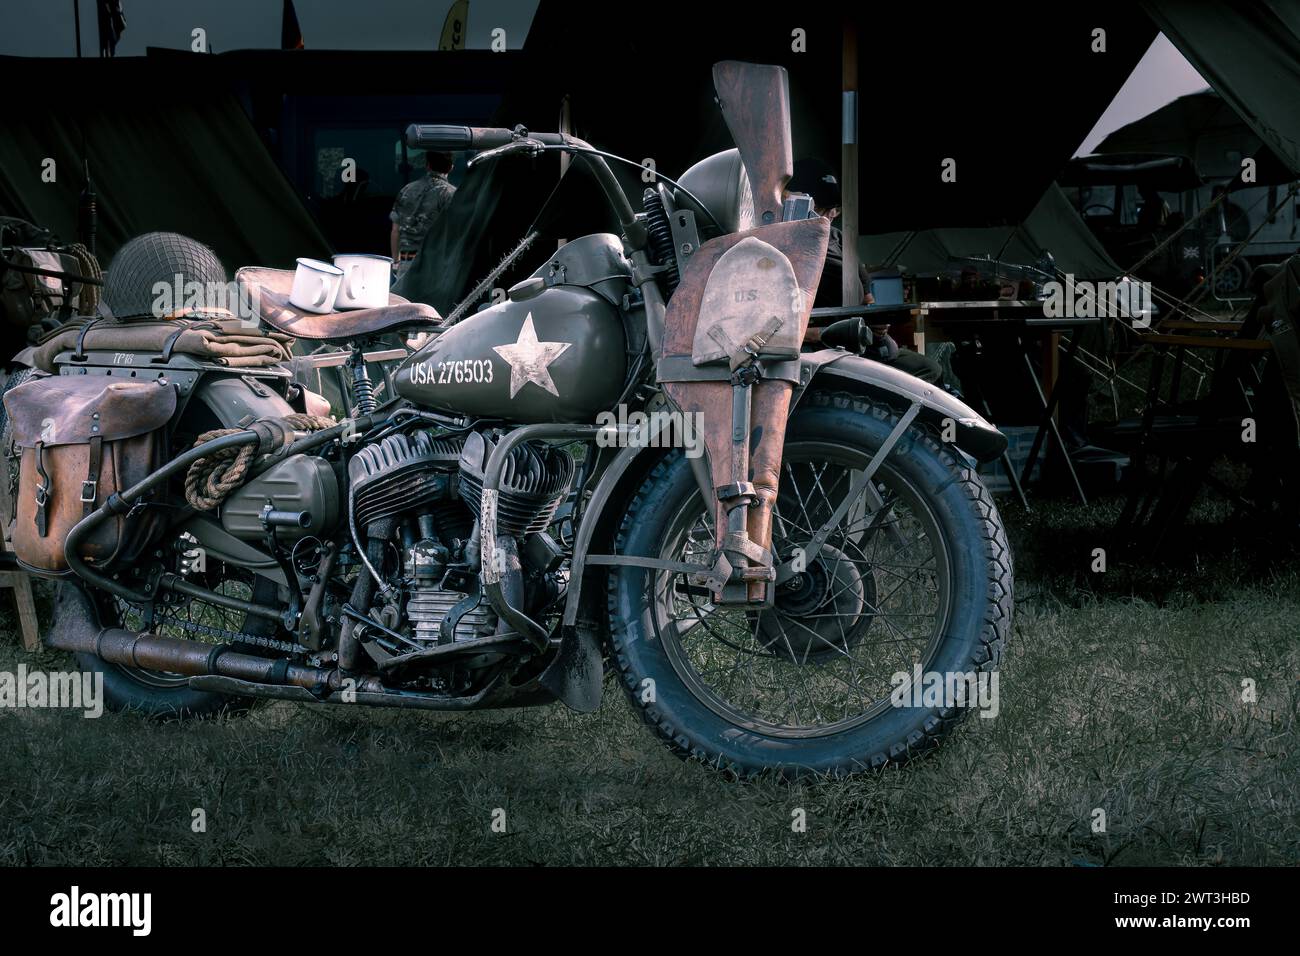 US army World War 2 Harley Davidson motorcycle fully kitted out with army equipment Stock Photo